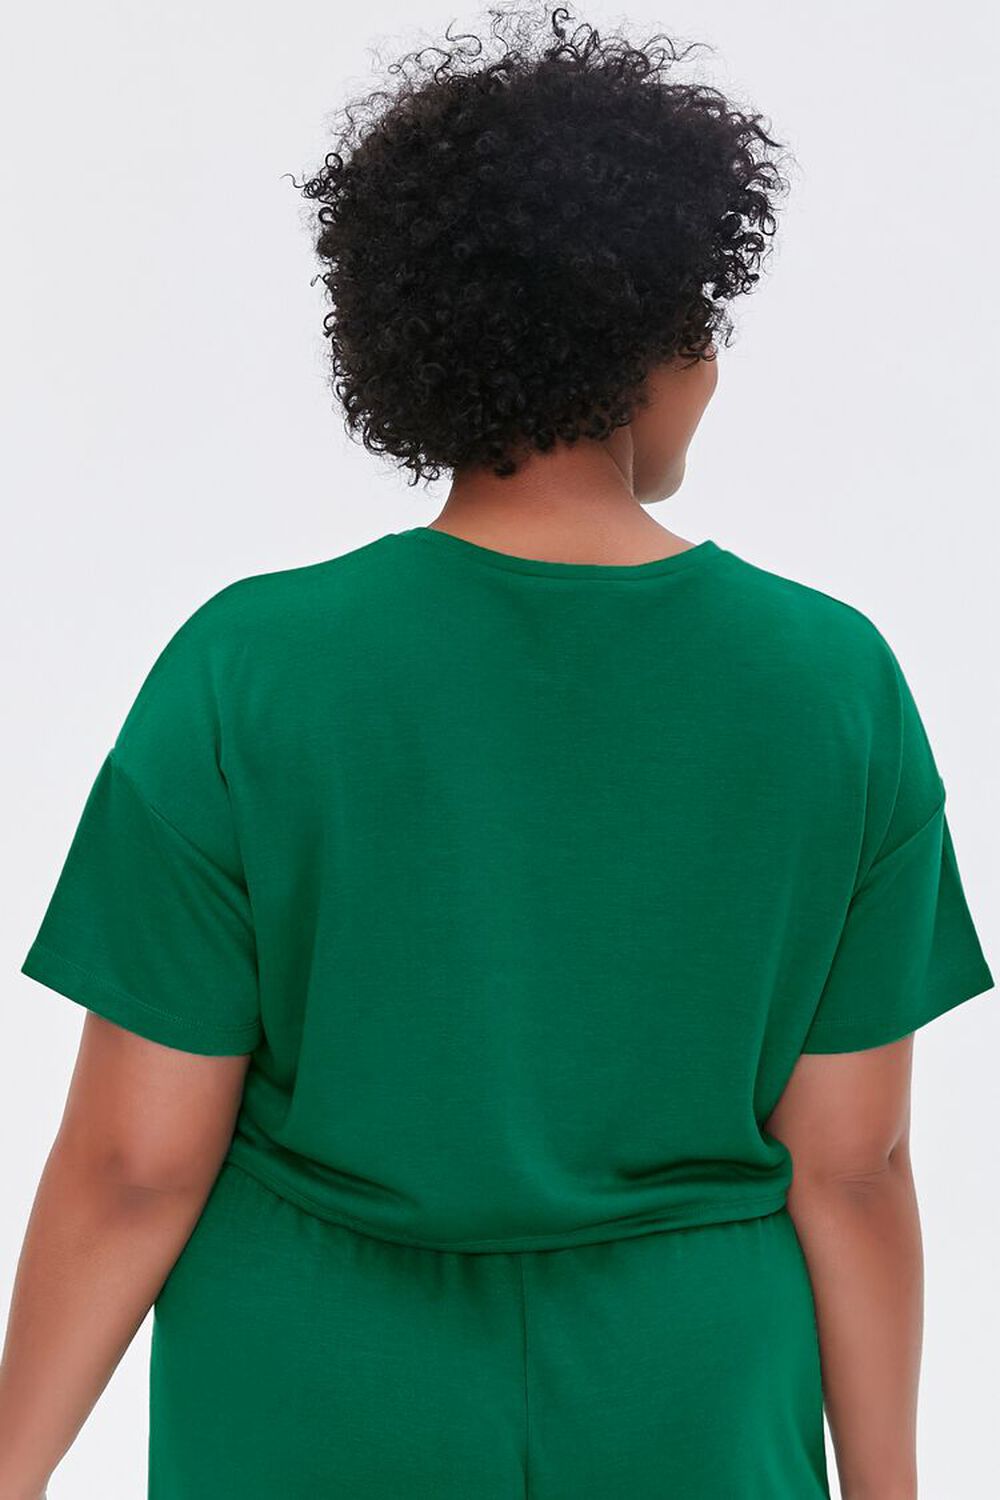 JADE Plus Size French Terry Tee, image 3